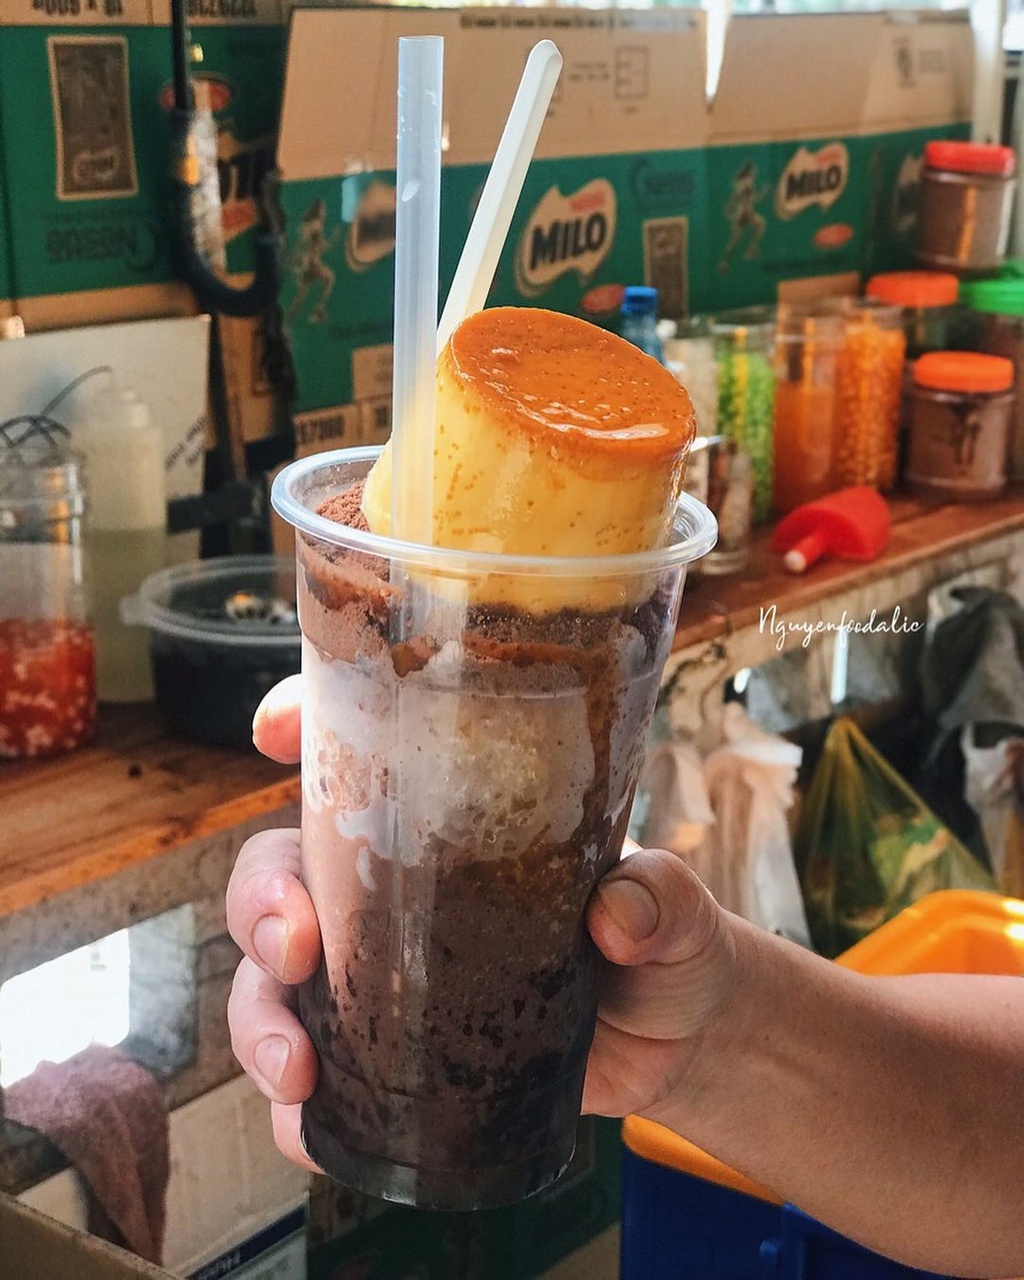 Visitors usually enjoy sampling a cold cup of cocoa when taking a tour of Nguyen Hue street. (Photo: Nguyenfoodalic)